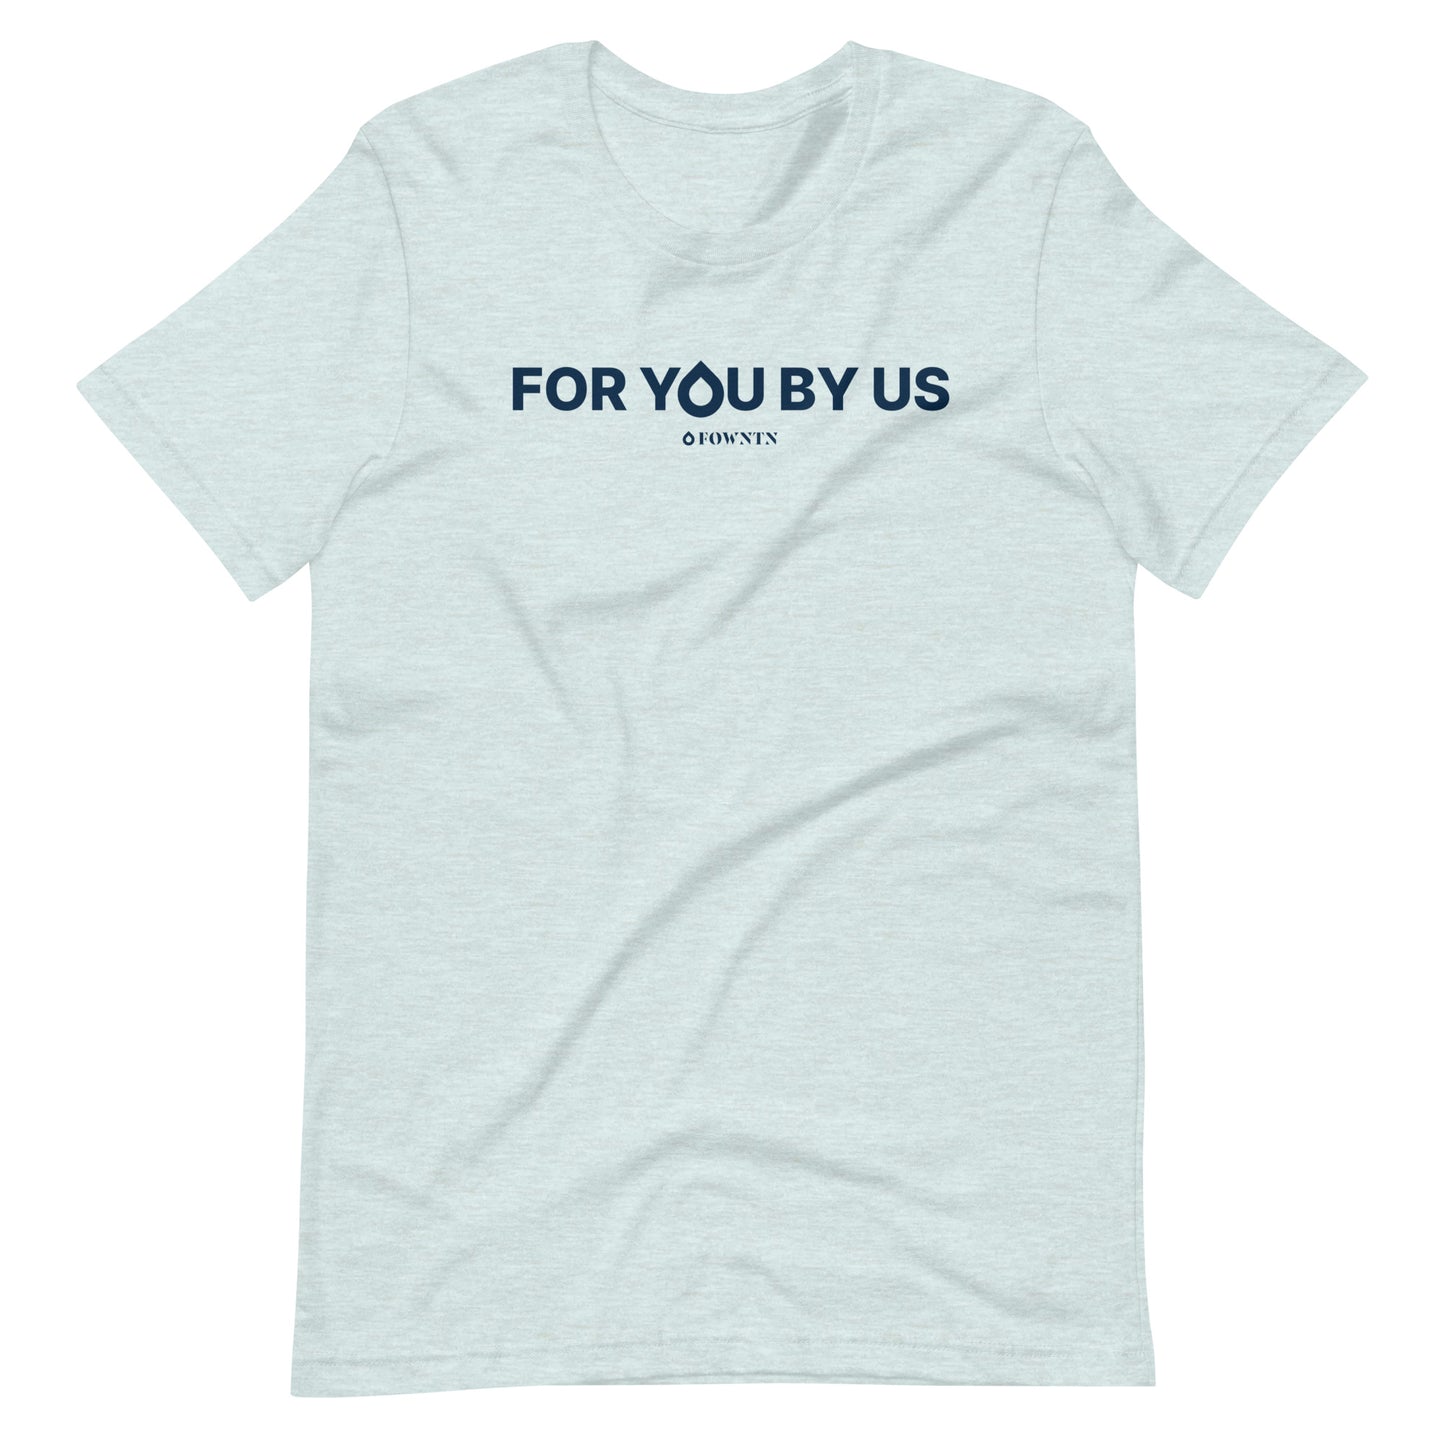 For You By Us T-Shirt